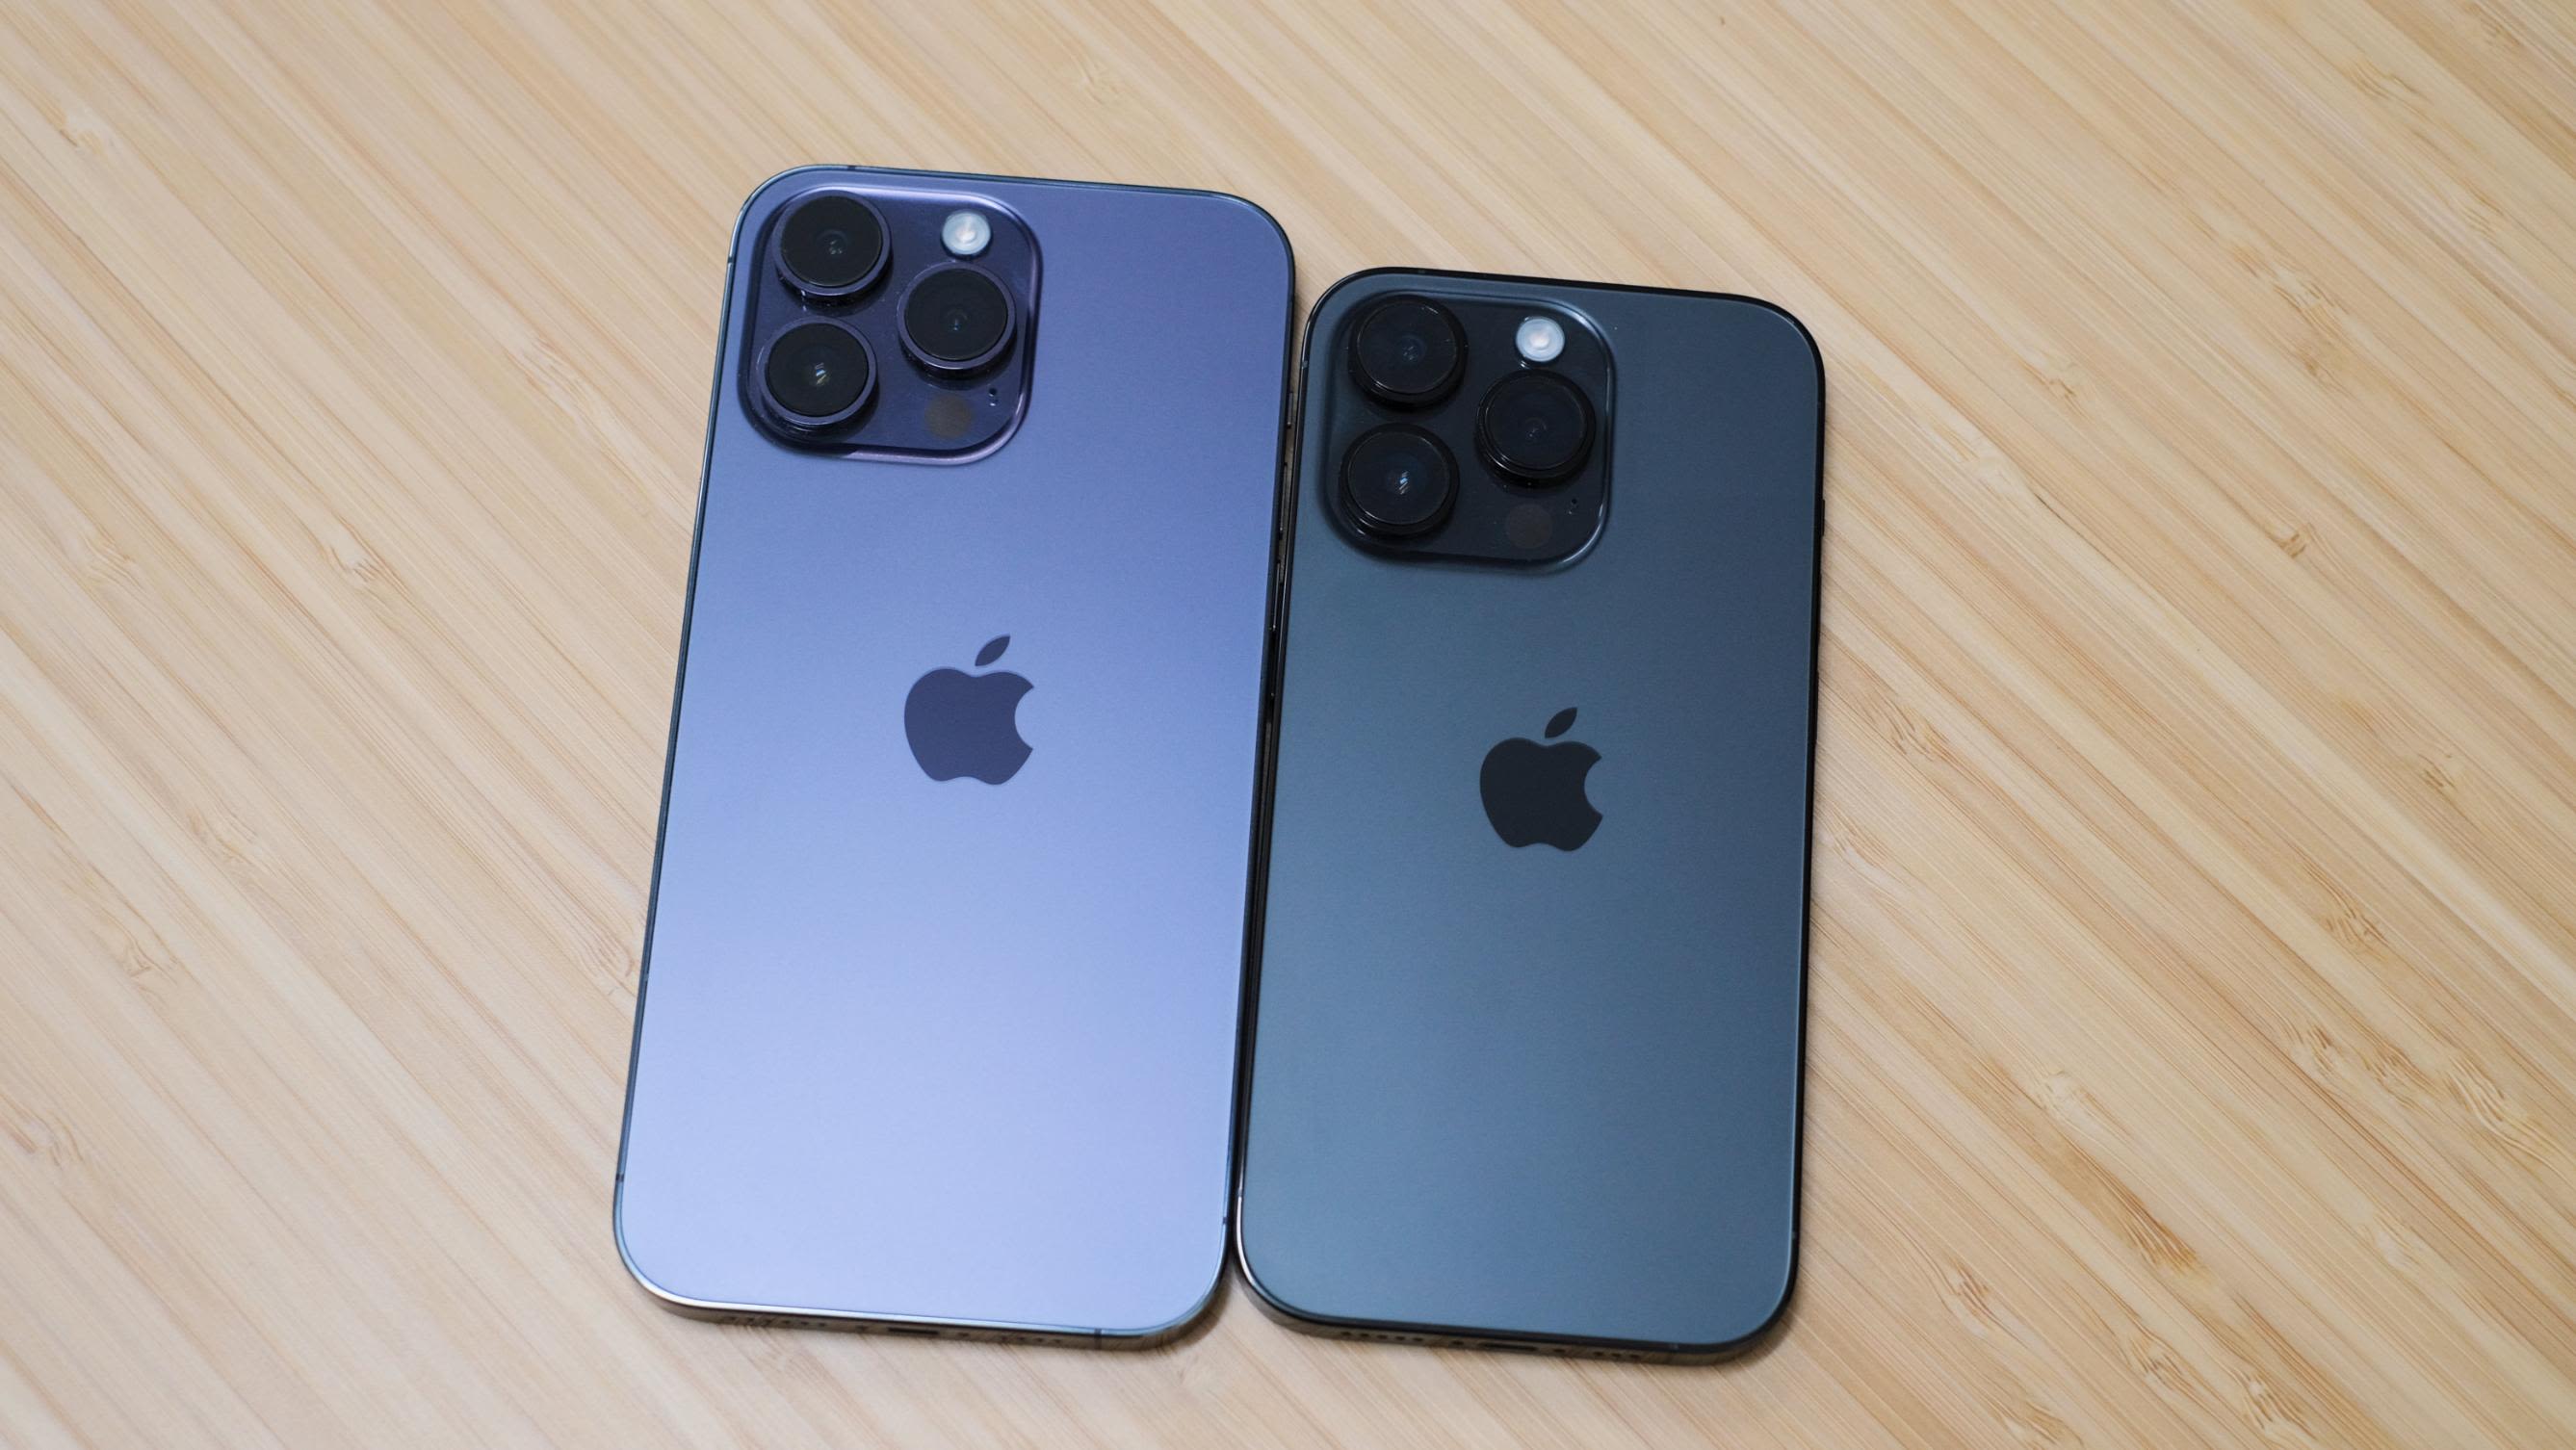 iPhone 14 Pro vs iPhone 14 Pro Max: Which iPhone should you upgrade to?